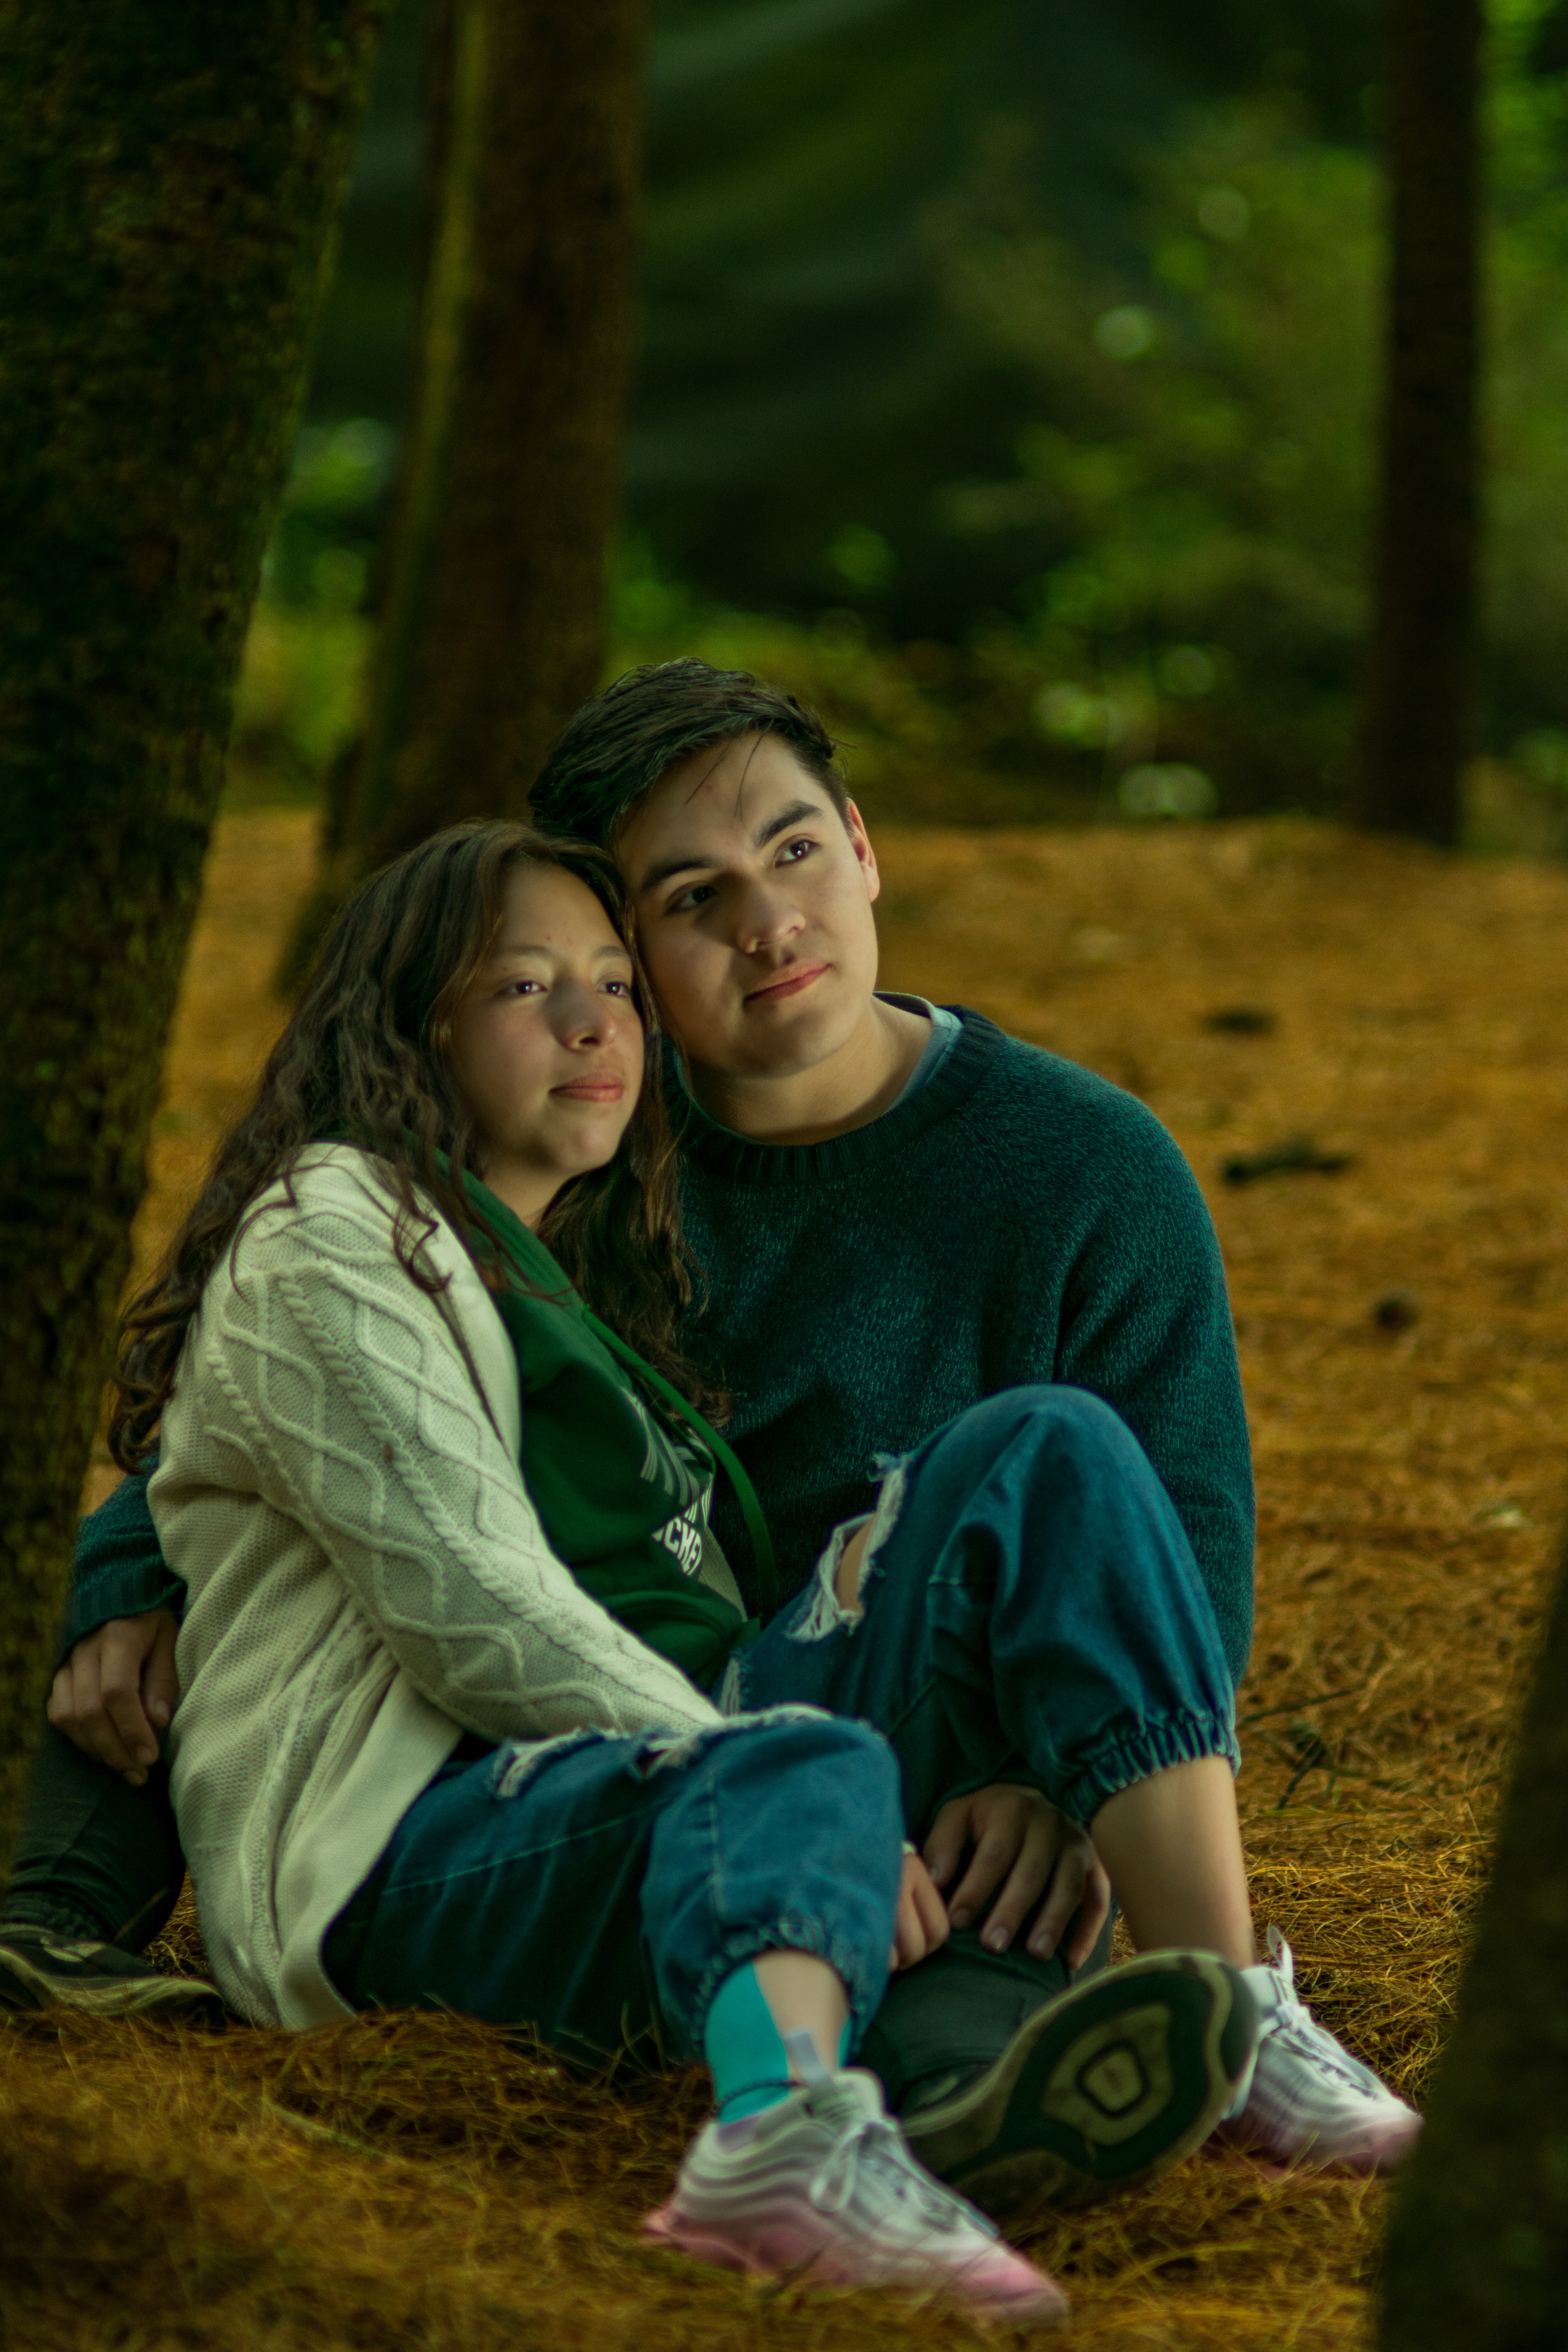 Embracing Young Couple Sitting on the Ground in the Forest. | Source: Pexels